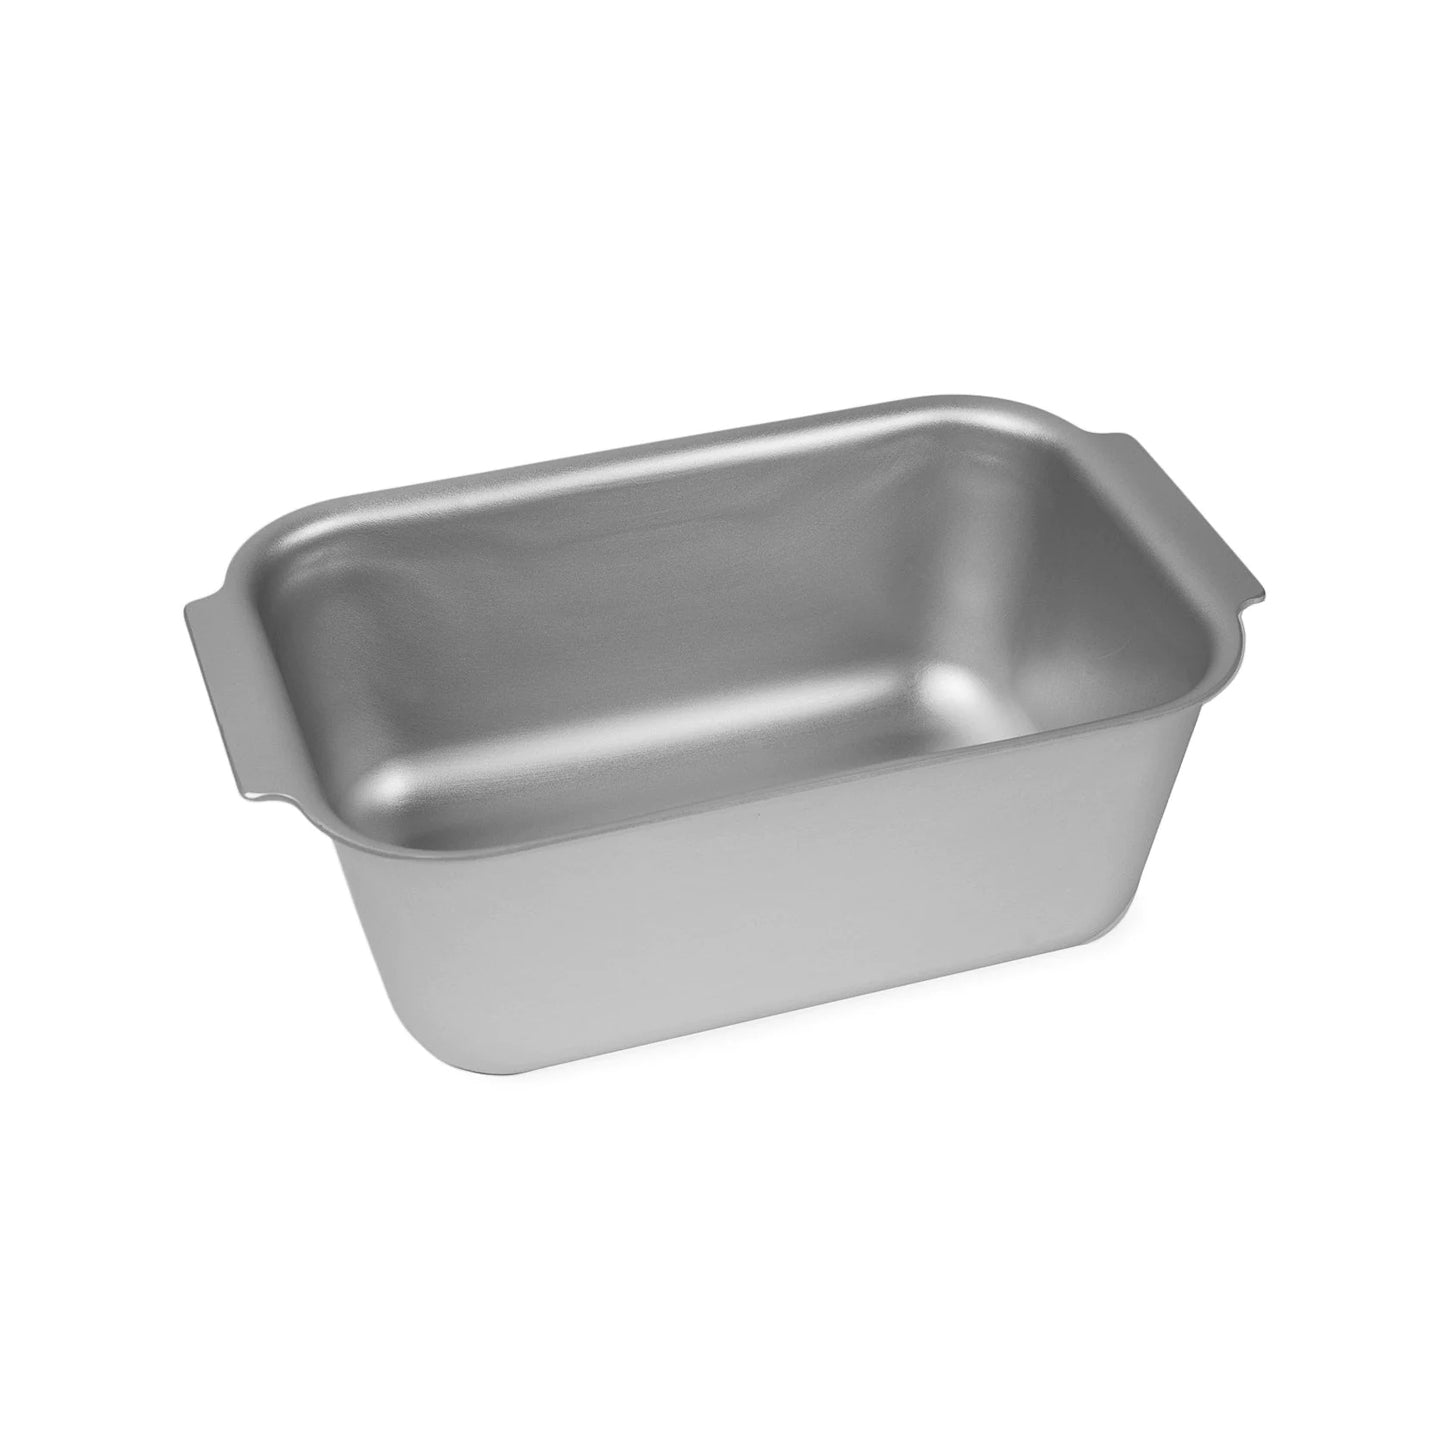 Silverwood Bakeware Loaf Pan with Round Corners